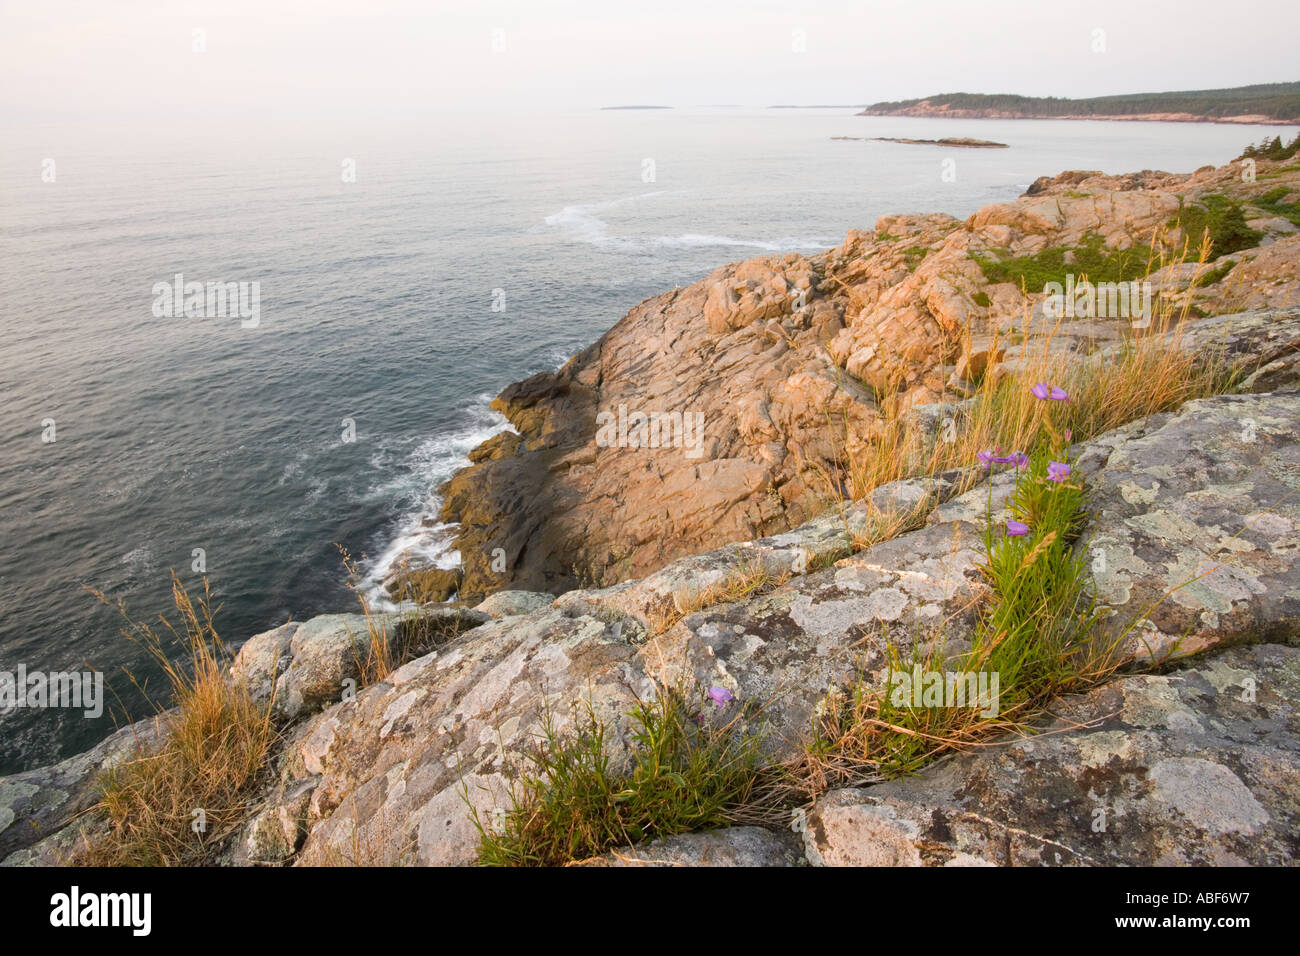 Early morning on the cliffs of Great Head in Maine s Acadia National Park Bluebells, Campanula rotundifolia. Stock Photo